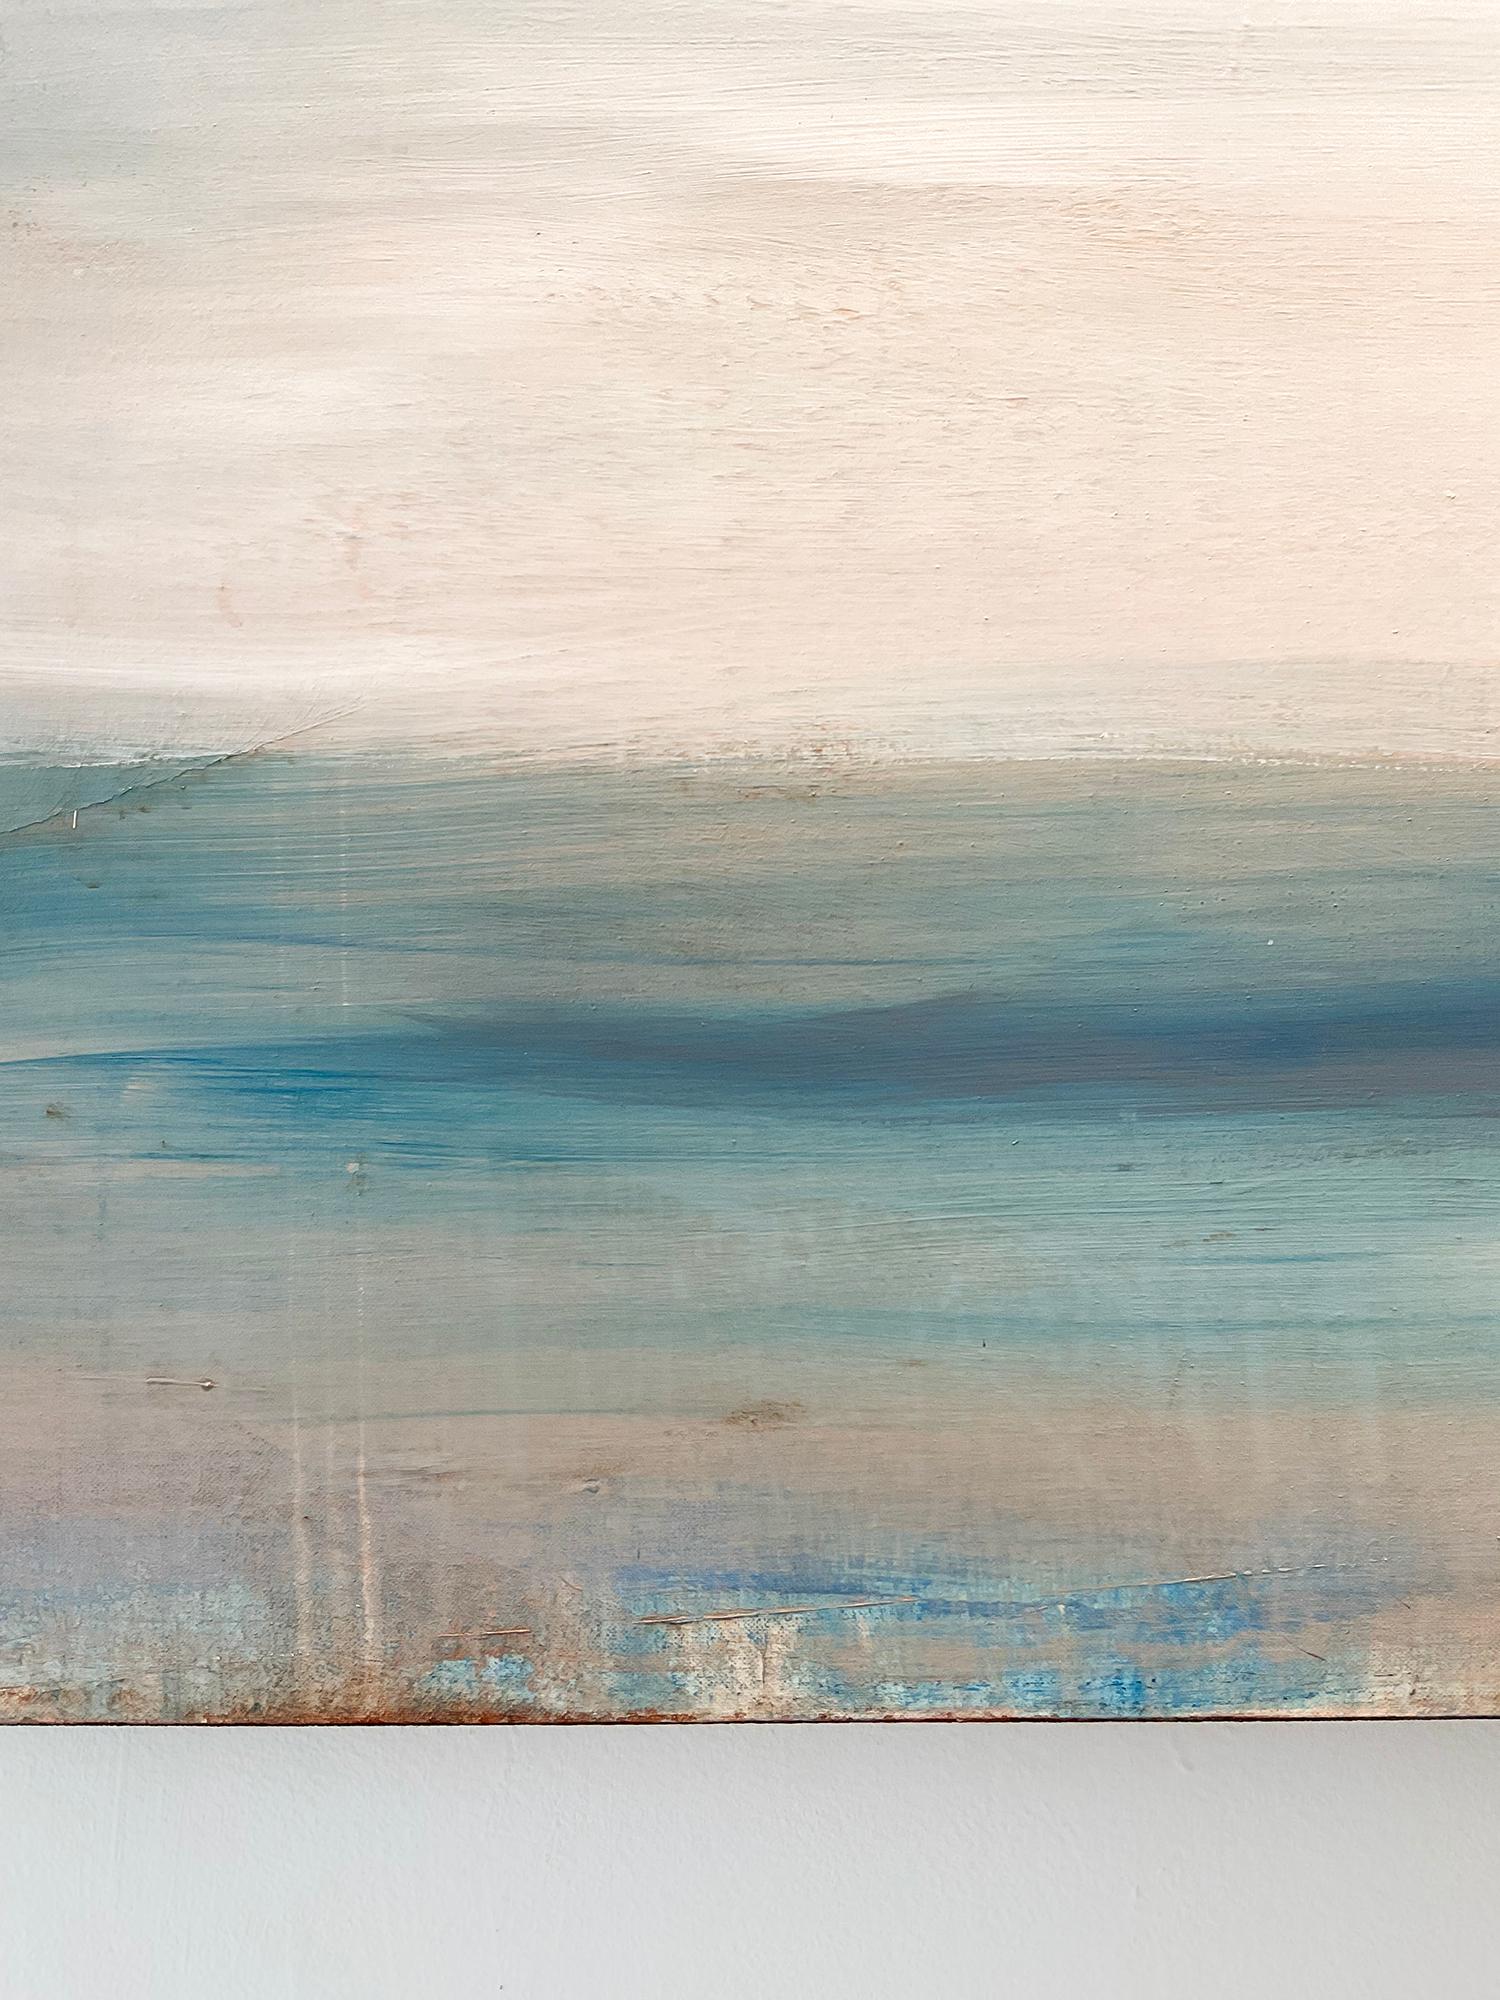 Abstract color field painting in atmospheric shades of blue, teal, aqua, white and grey with an accent of soft peach
